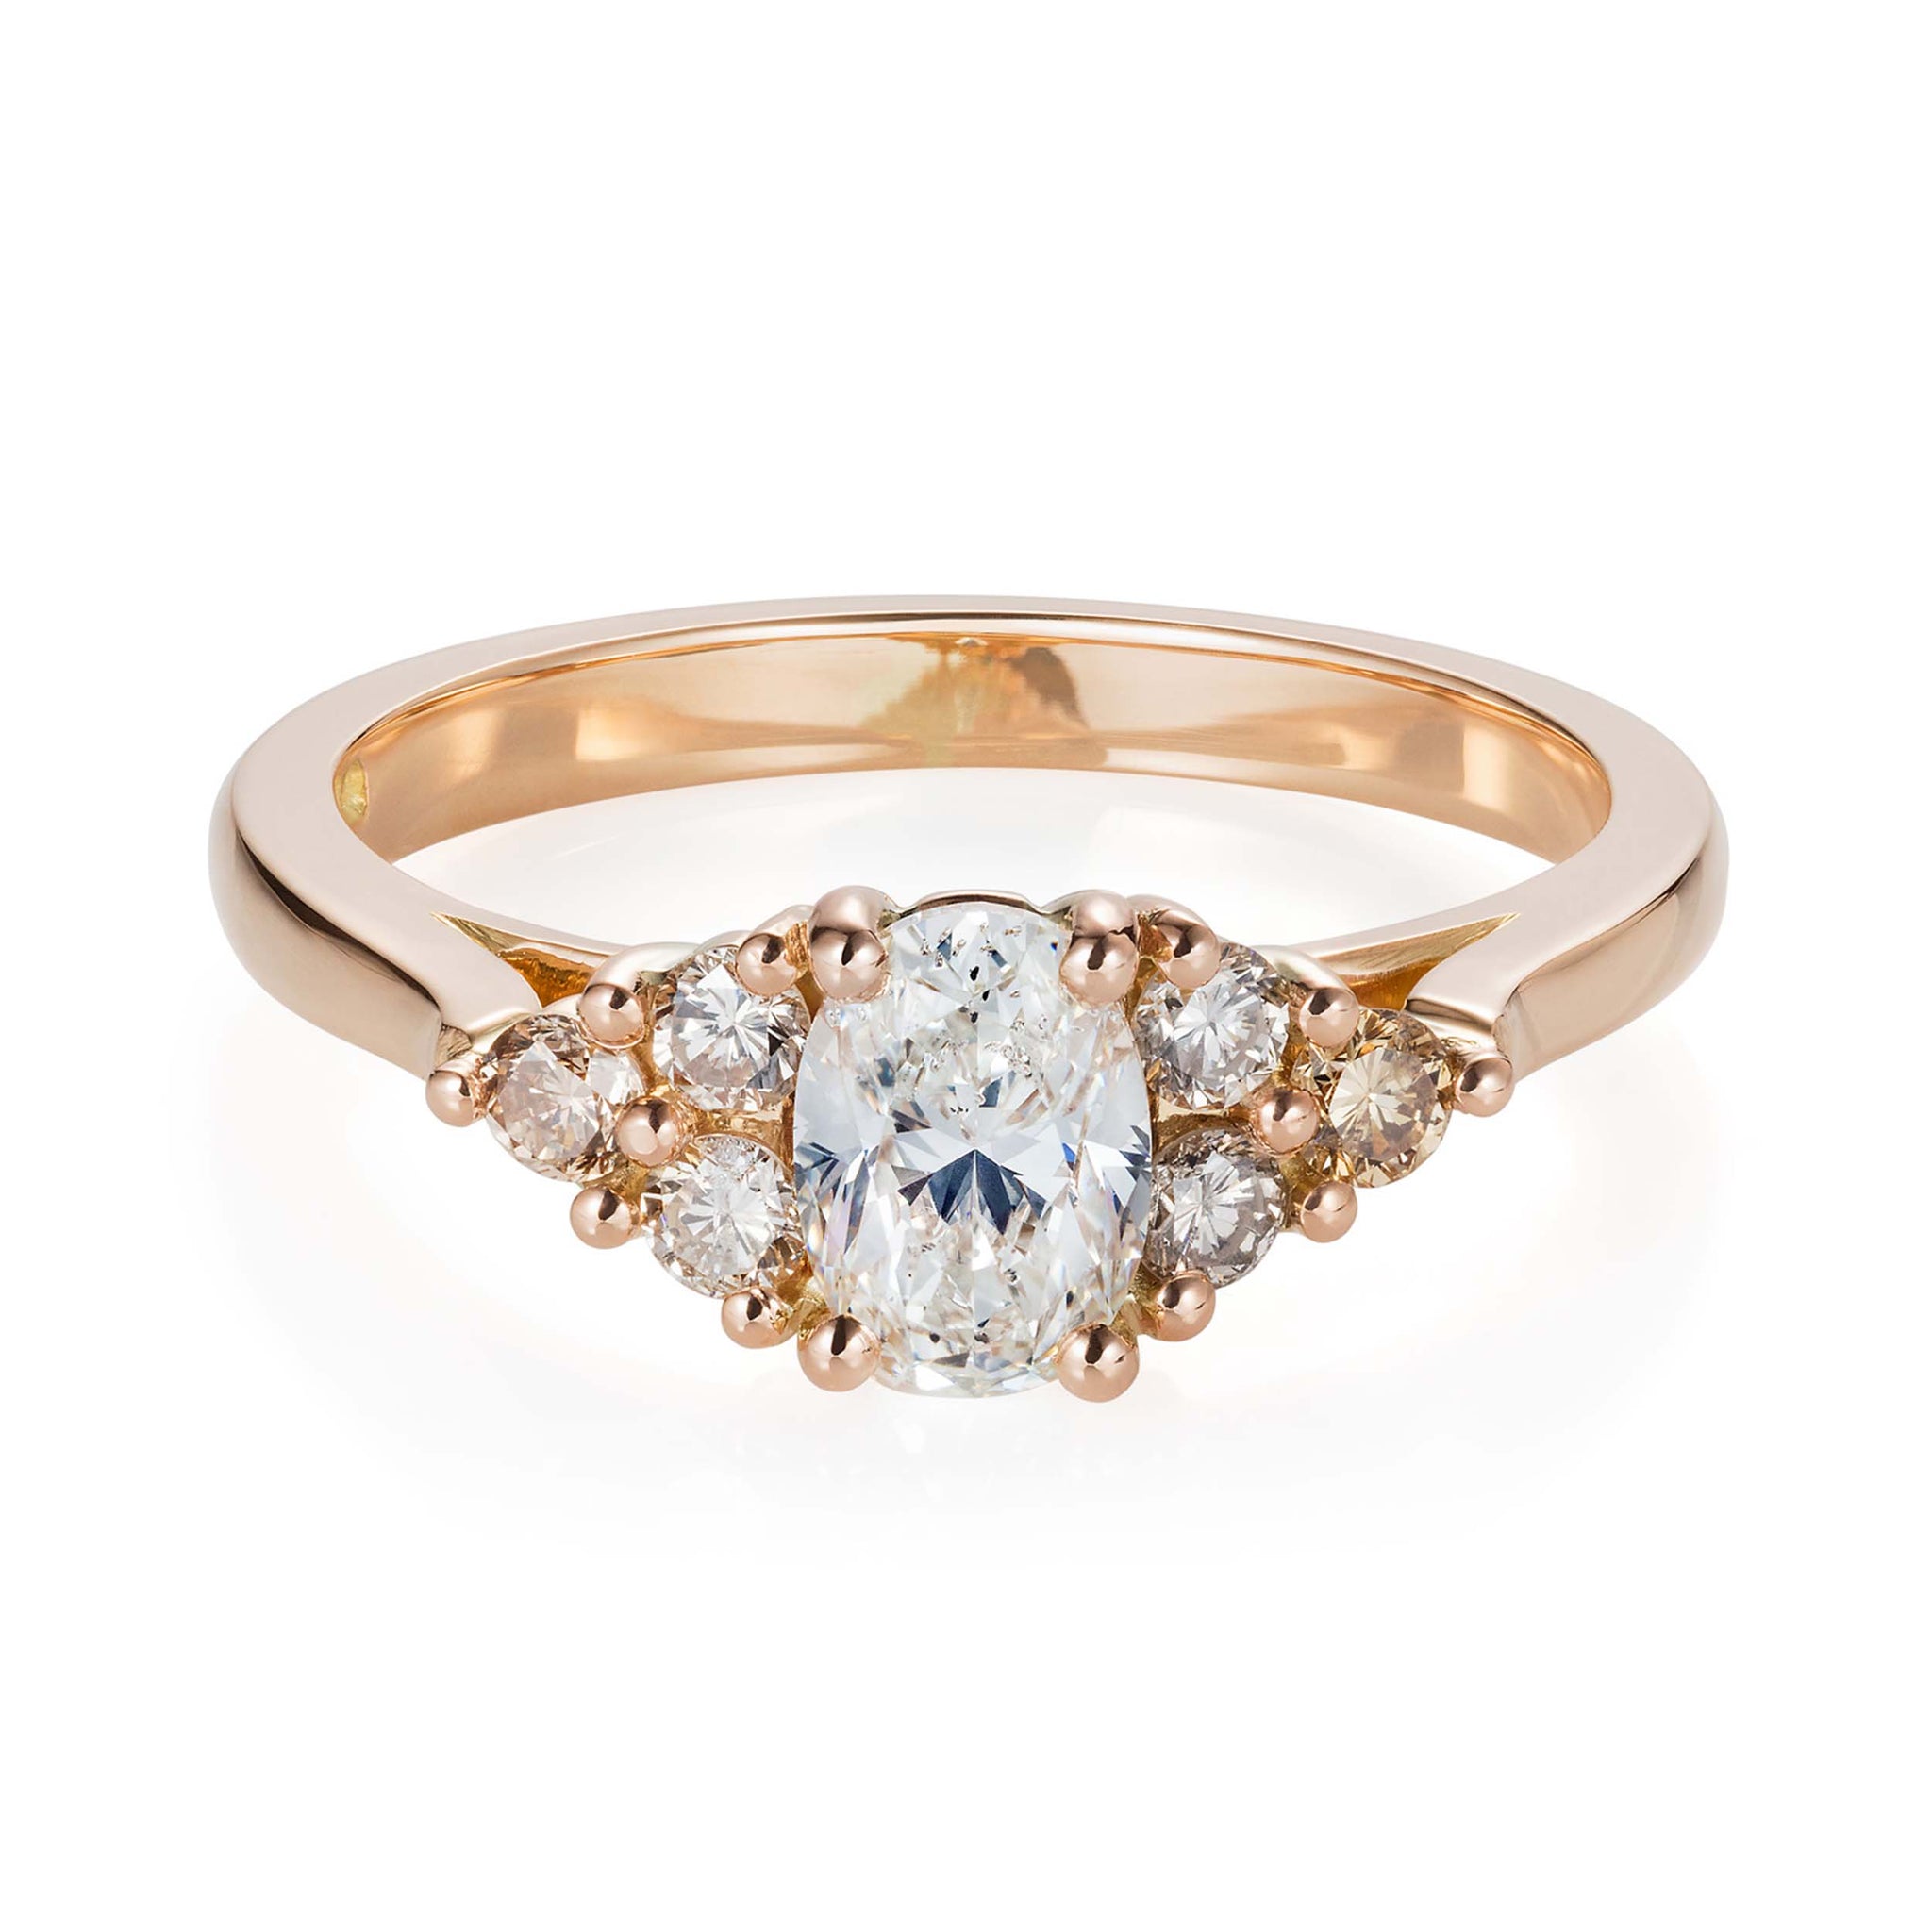 Ombré Champagne Engagement Ring by Yasmin Everley